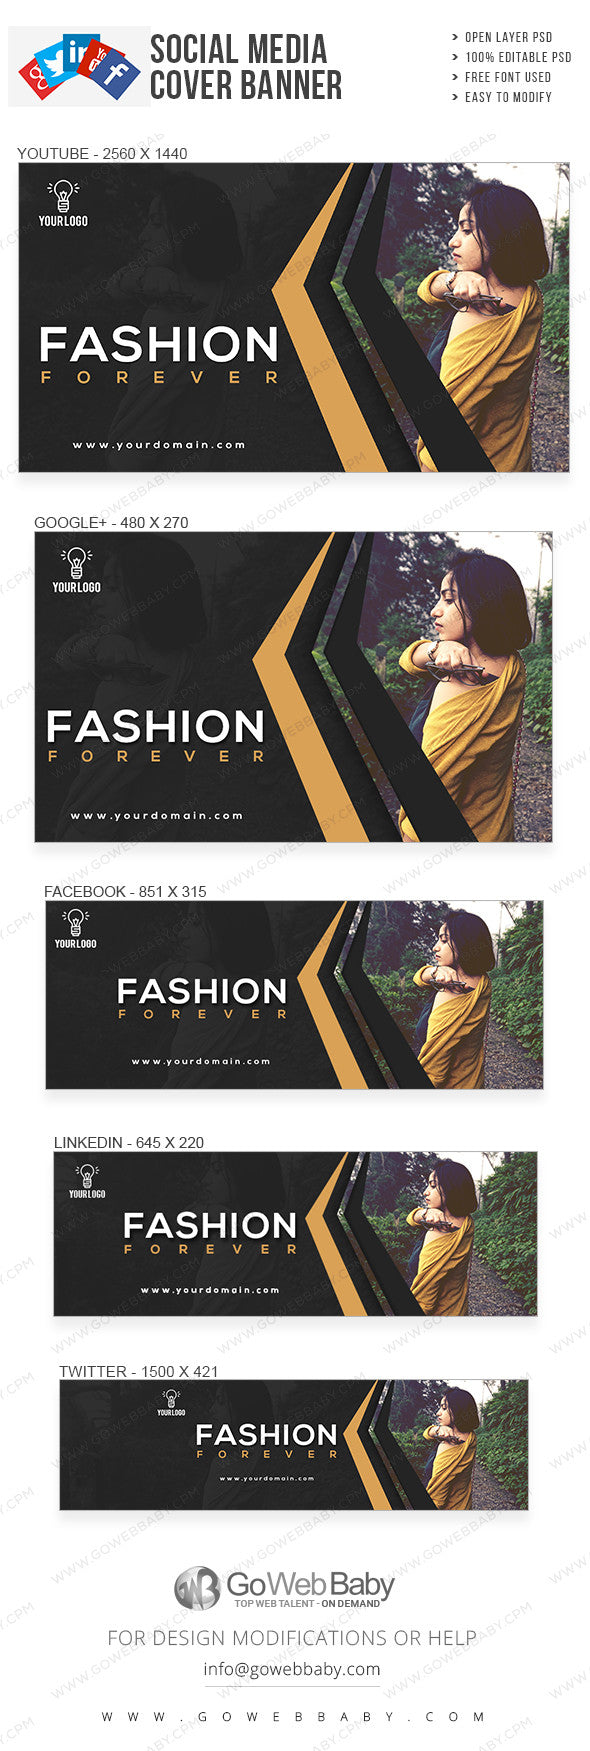 Latest Fashion Social Media Covers For Website Marketing - GoWebBaby.Com